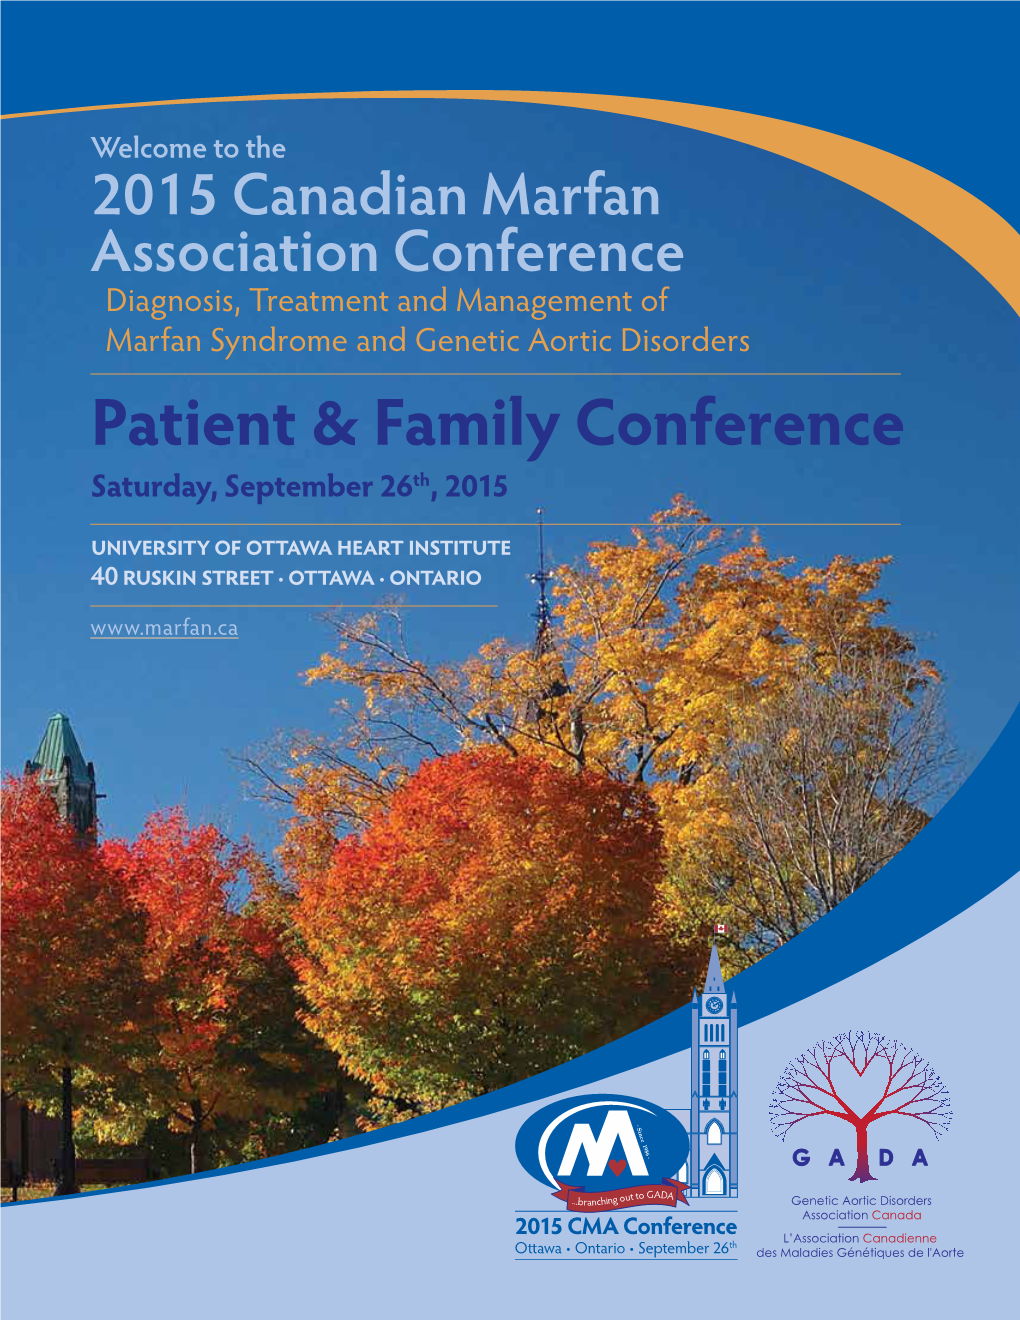 Patient & Family Conference